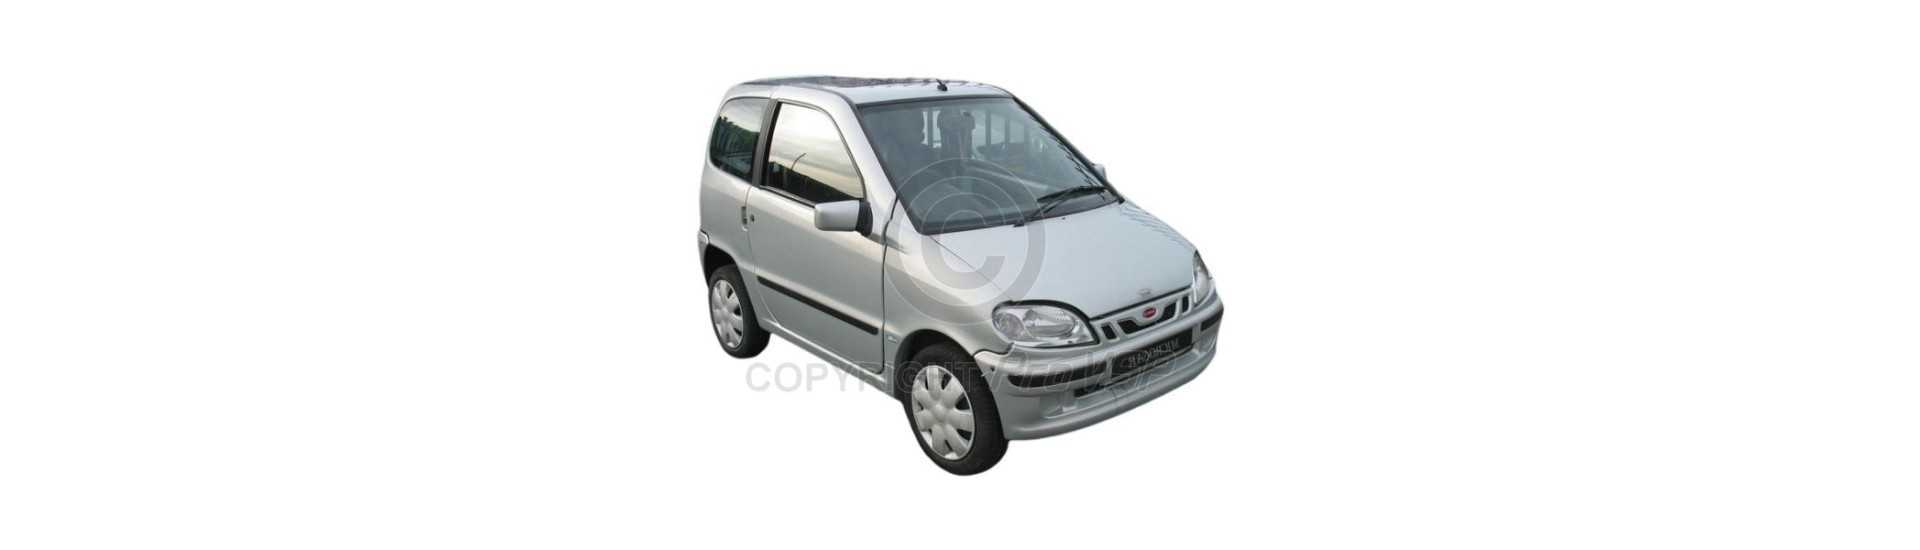 Bodywork at the best price for car without a permit Microcar Virgo 3